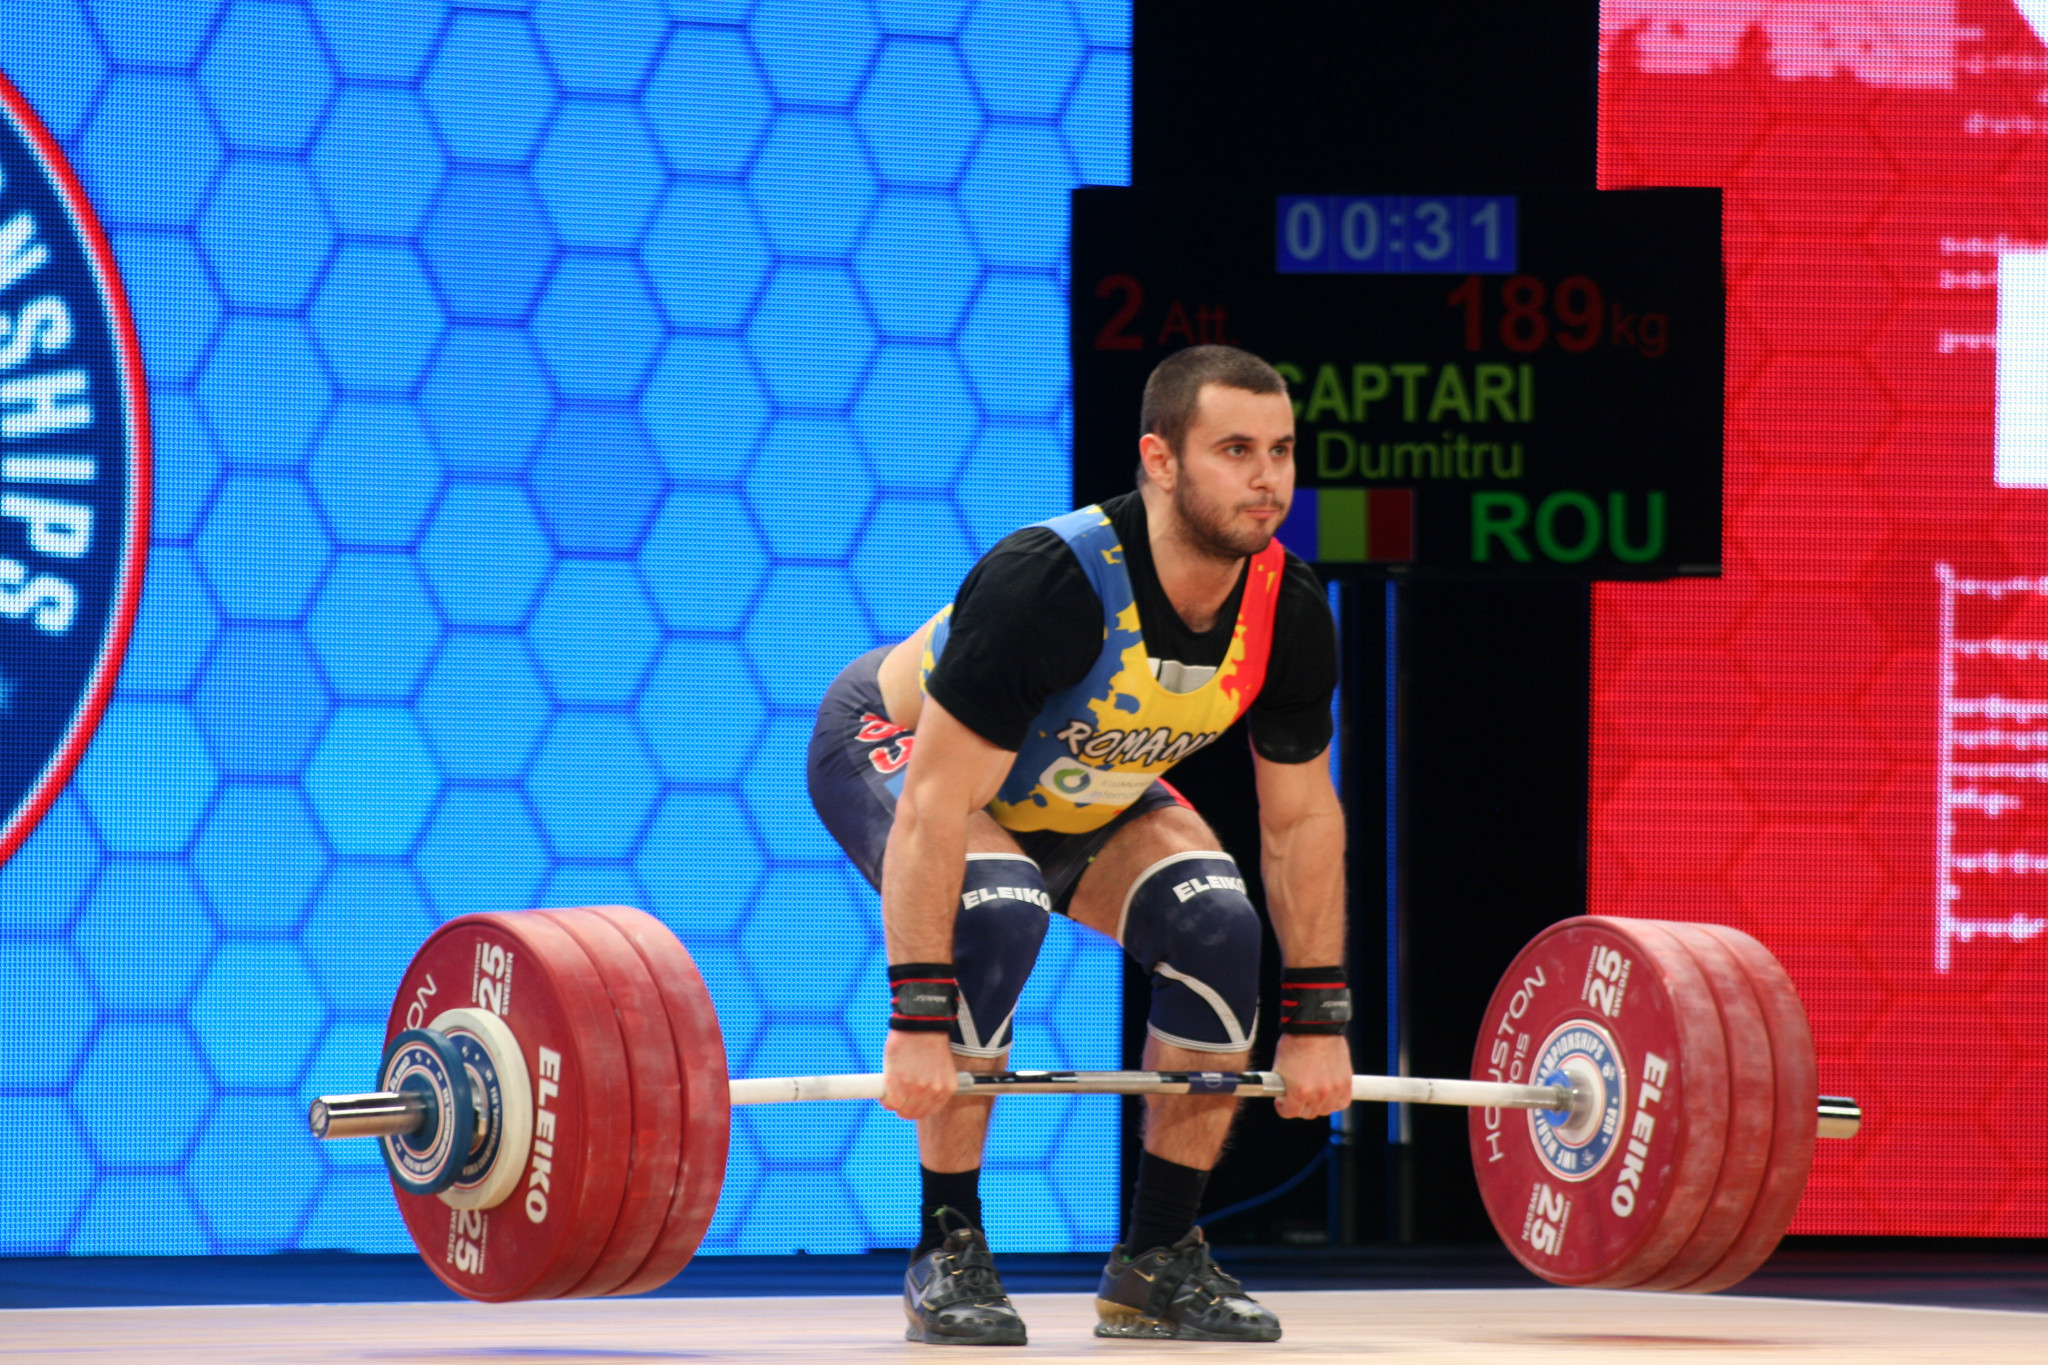 Weightlifting legend Vlad hoping long wait for world gold will end for resurgent Romania